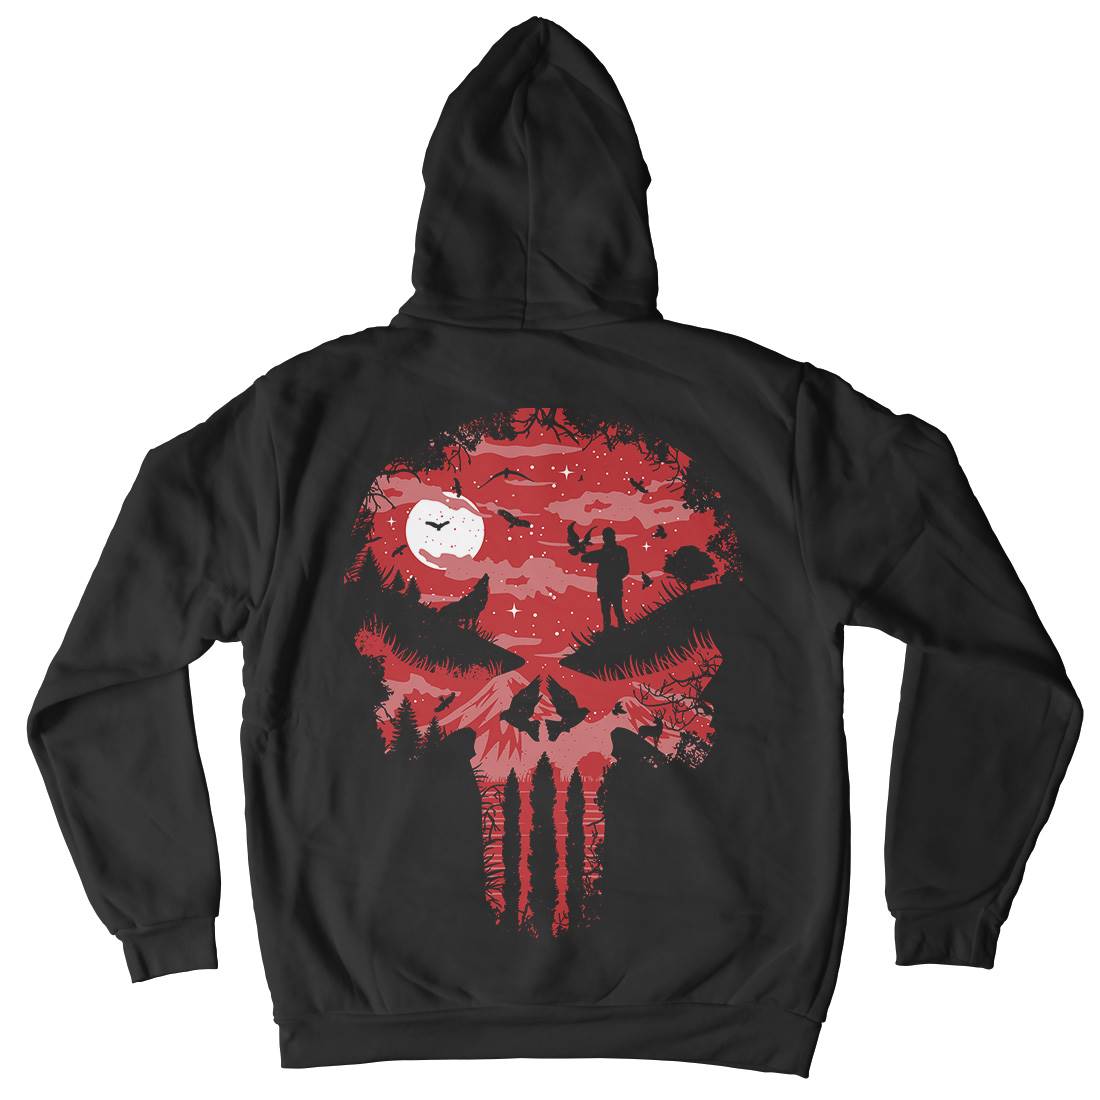 Stand And Bleed Kids Crew Neck Hoodie Horror B085